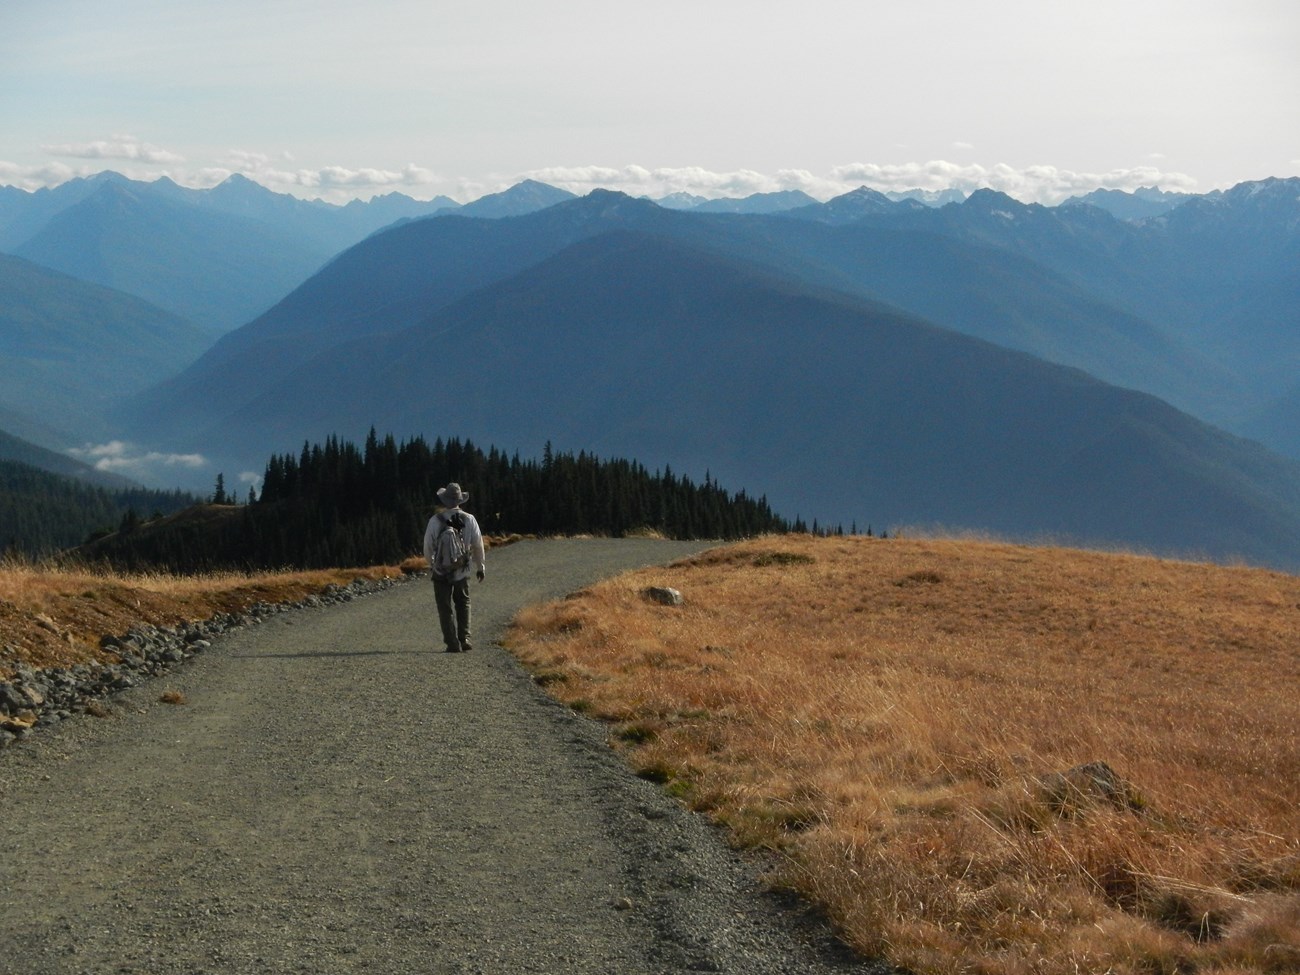 A hiker on a wide gravel trail with mountains in the distance.